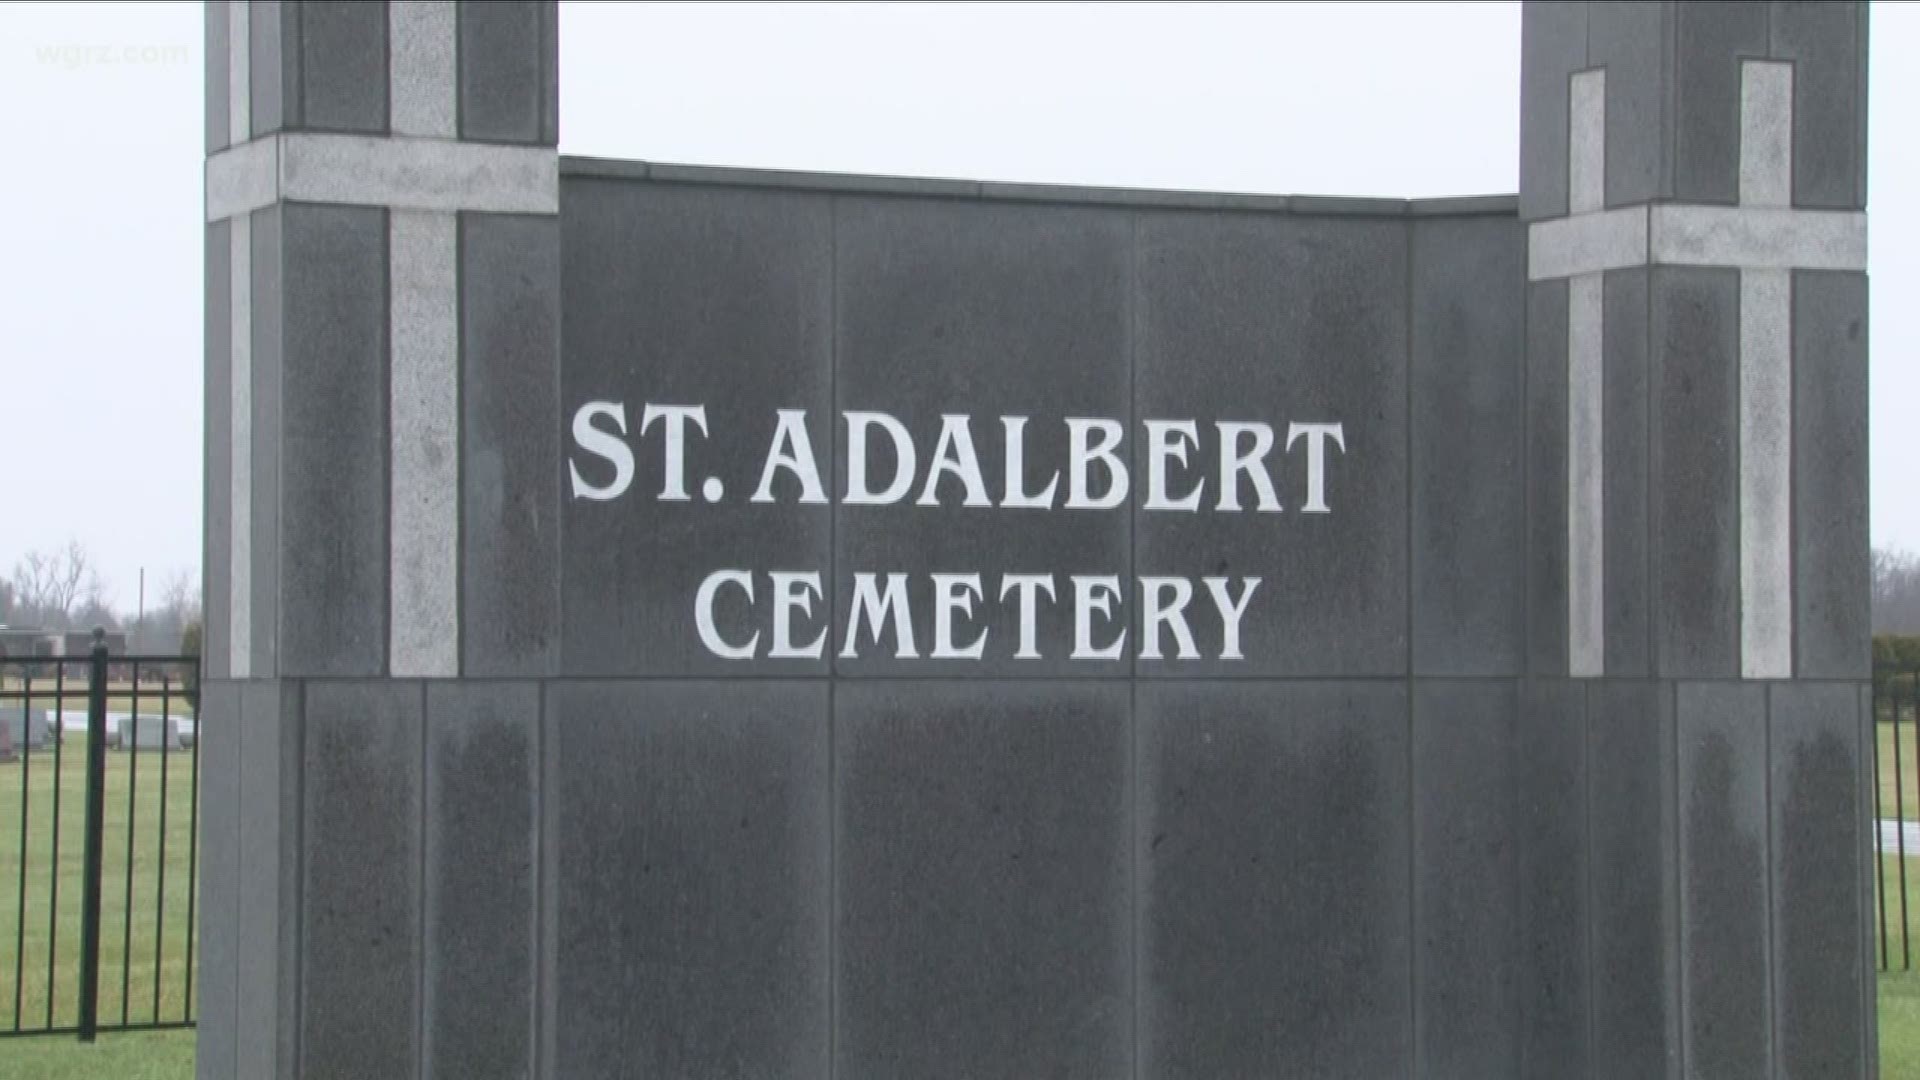 After we received a tip from a viewer that graves in Saint Adalberts in Cheektowaga were under water, the Buffalo Diocese has taken steps to alleviate flooding.